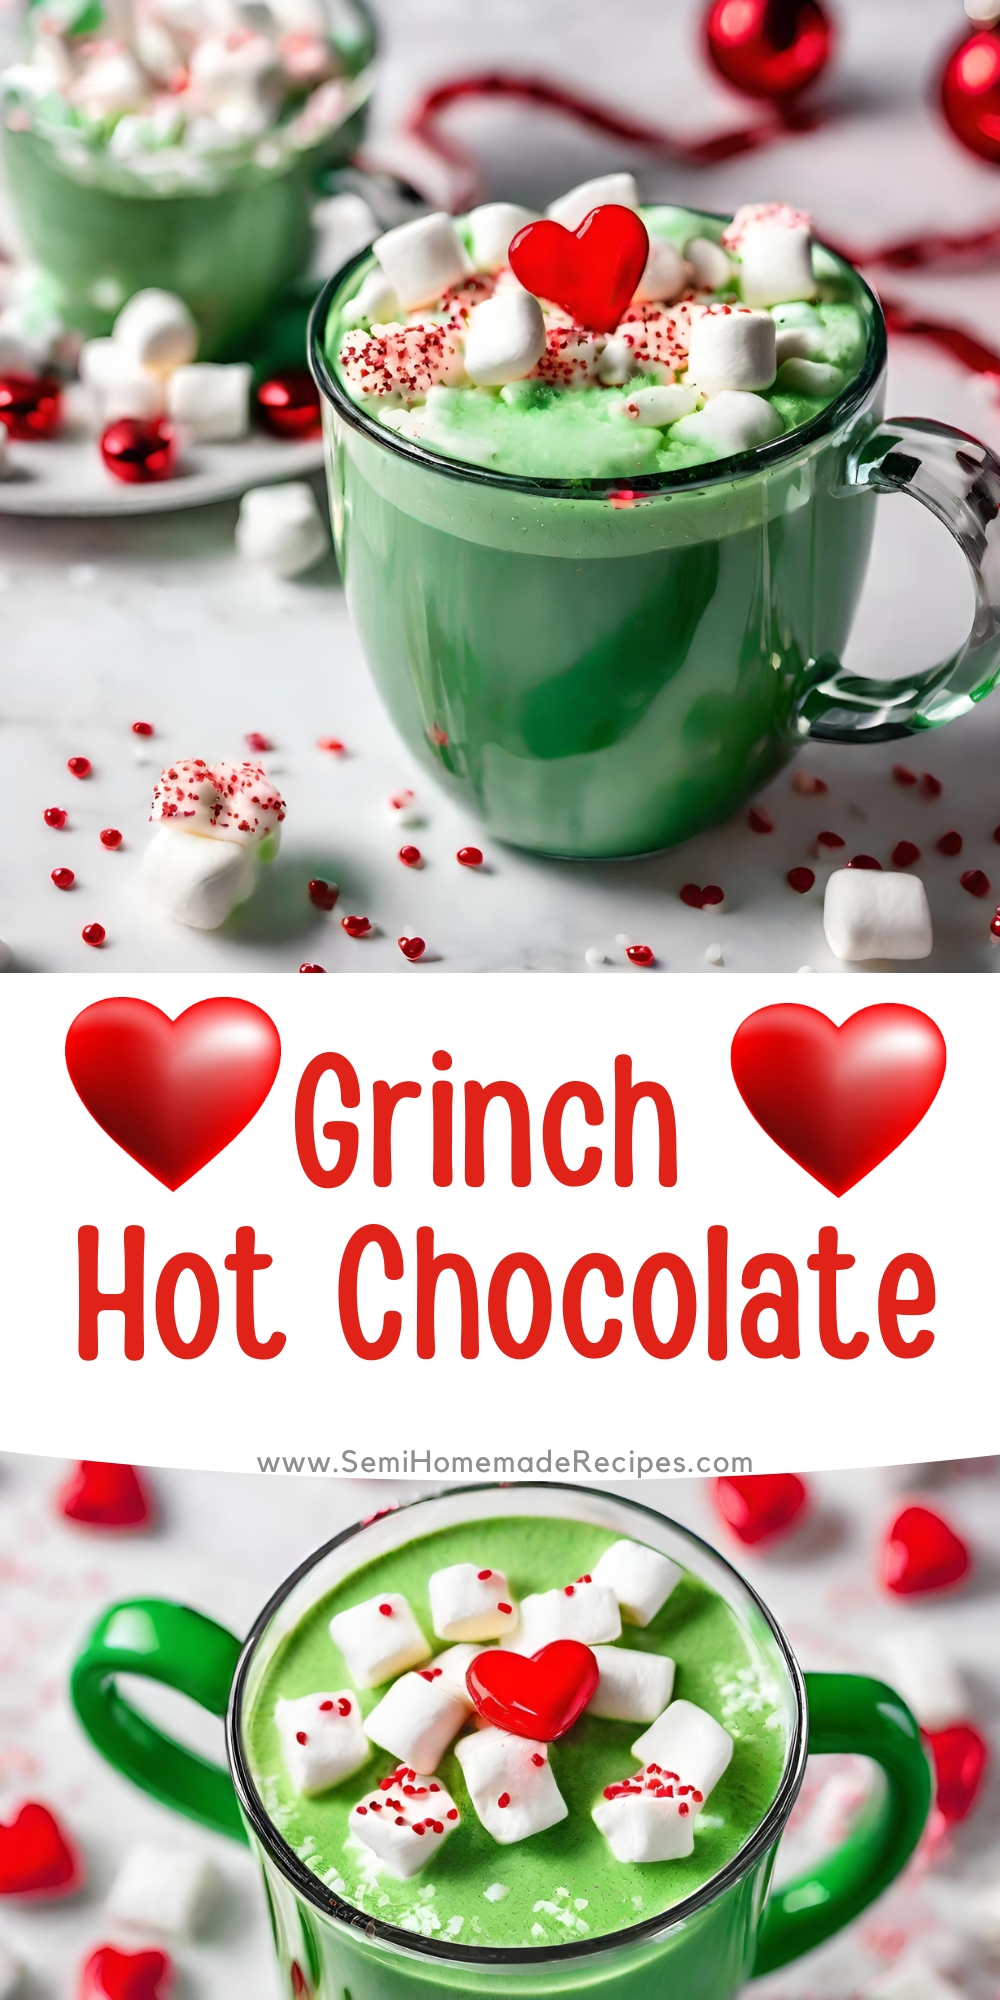 Themed Hot Chocolate are perfect for parties and movie nights! This Grinch Hot Chocolate  is perfect for watching "How The Grinch Stole Christmas" or for sipping by the tree on Christmas eve!